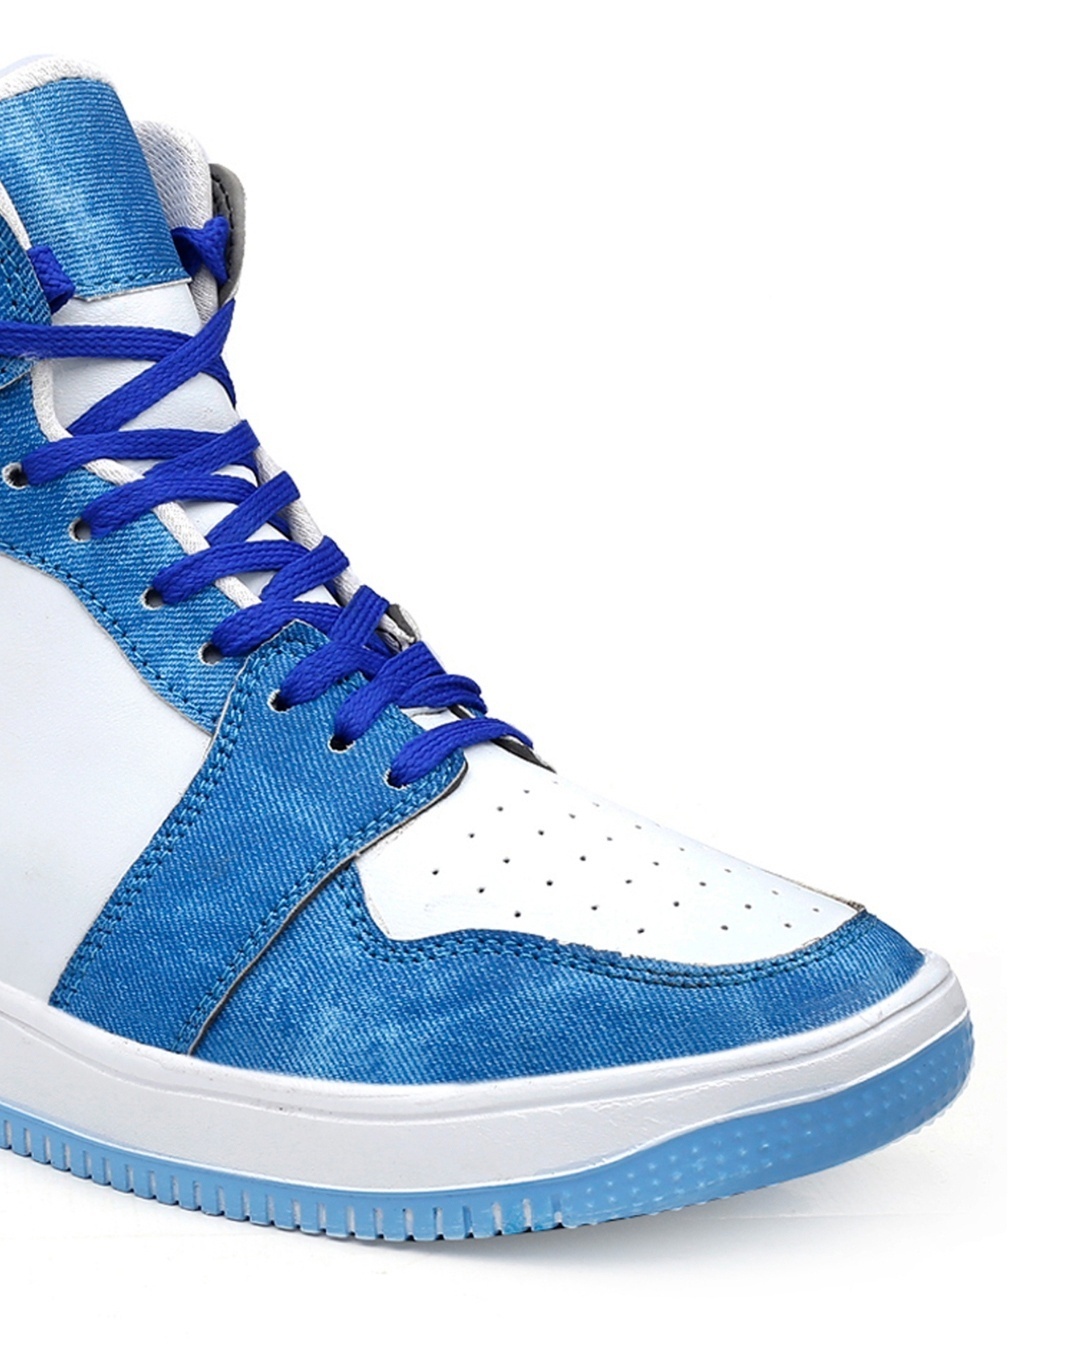 Shop Men's Blue and White Color Block Sneakers